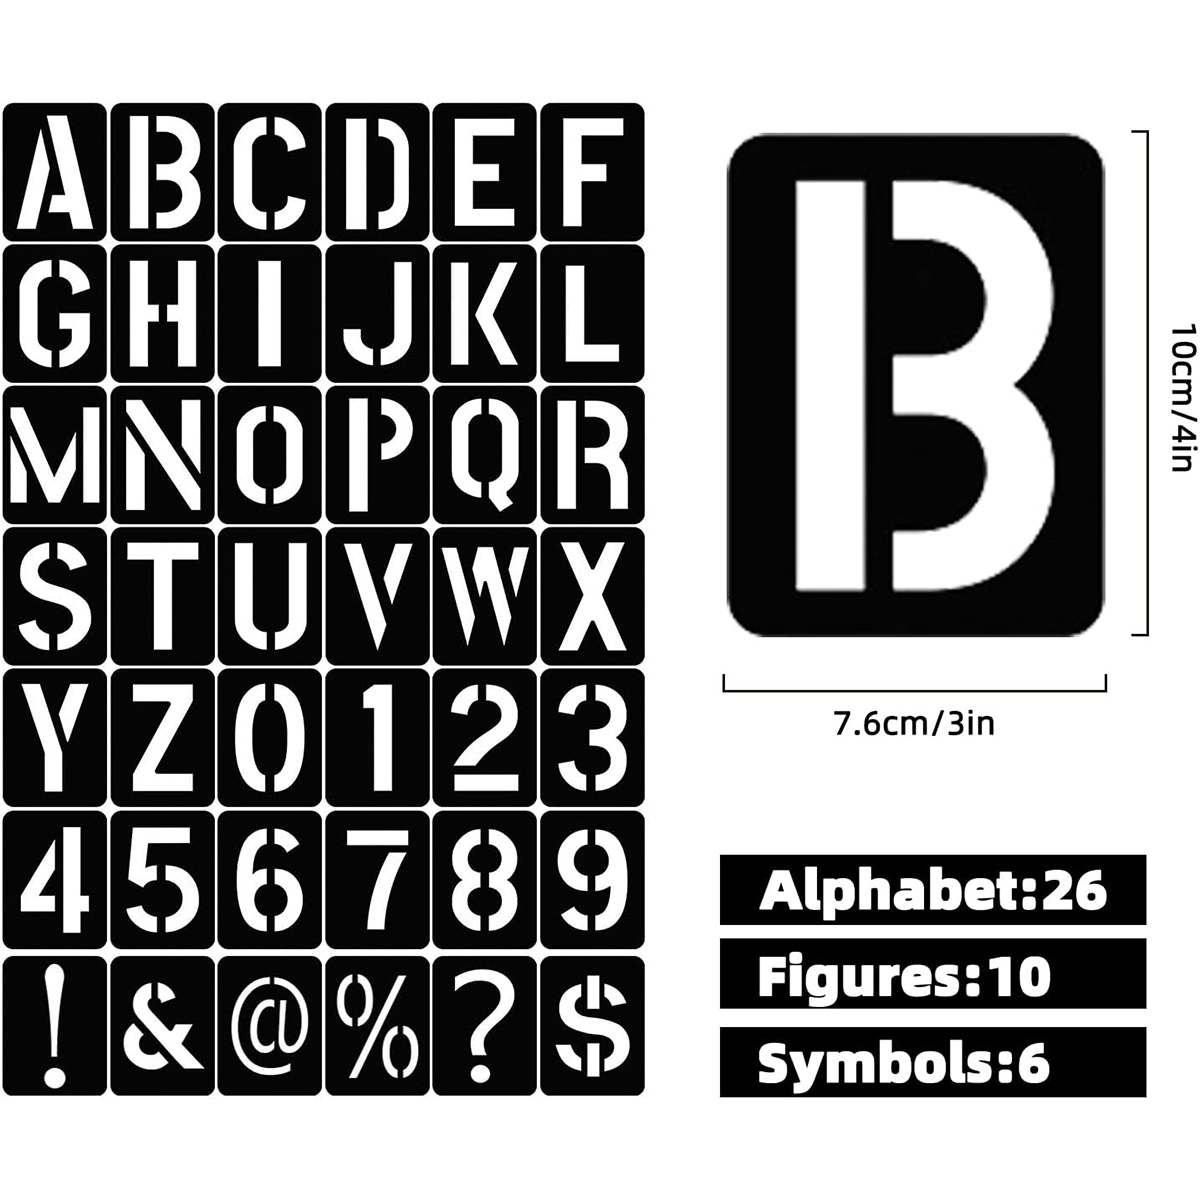 Alphabet Letter Stencils 4 inch, 42 Pcs Reusable Plastic Letter and Number  Templates Letter Decoration Art Craft Stencils for Painting on Wood, Wall